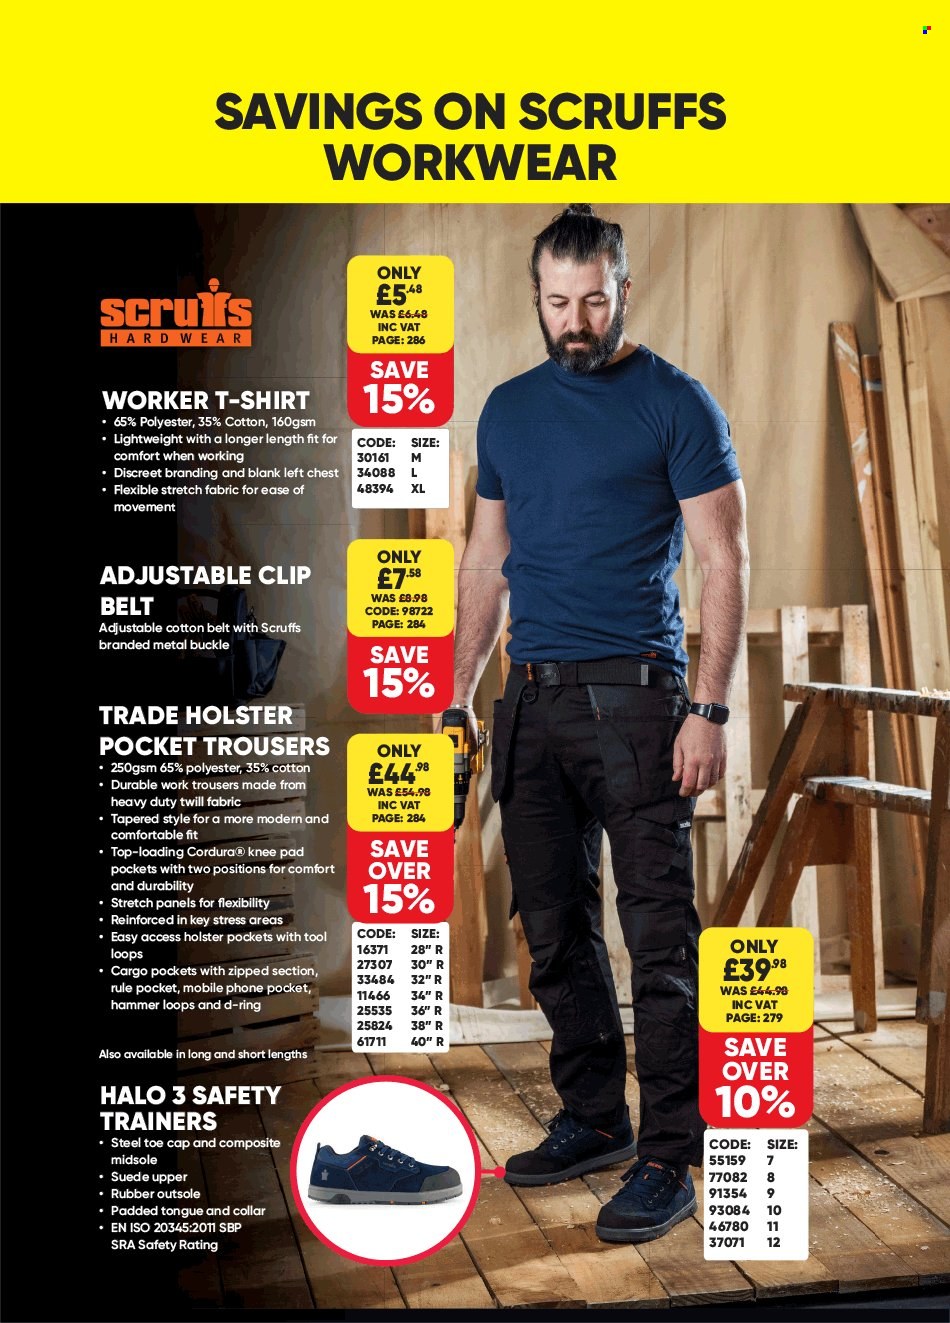 Toolstation offer . Page 272.